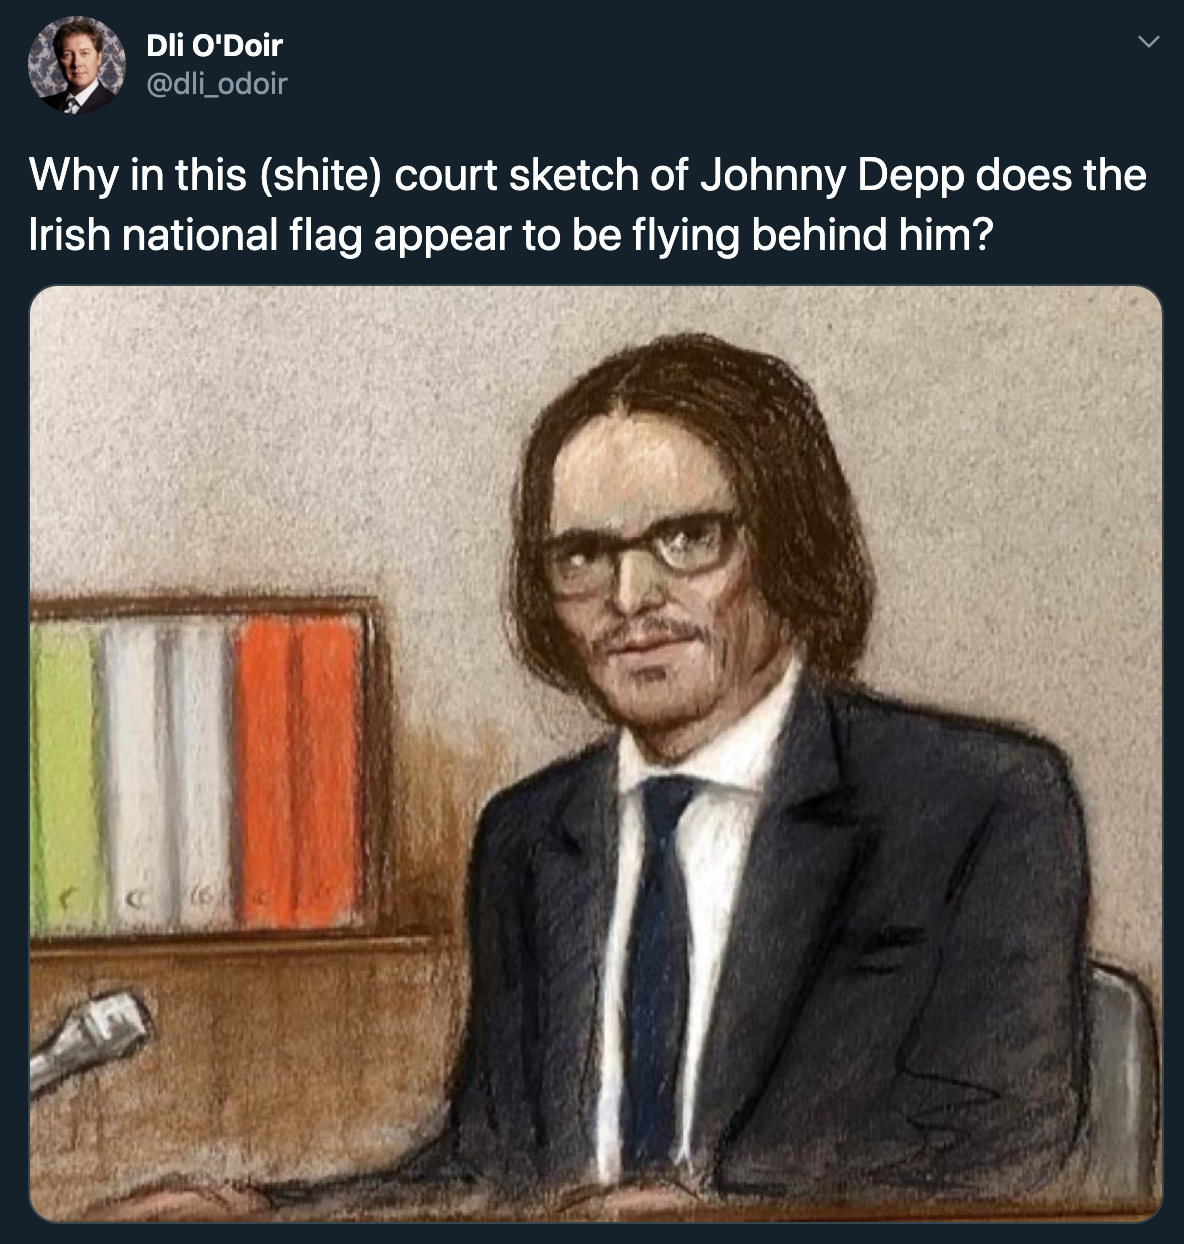 Why in this shite court sketch of Johnny Depp does the Irish national flag appear to be flying behind him?